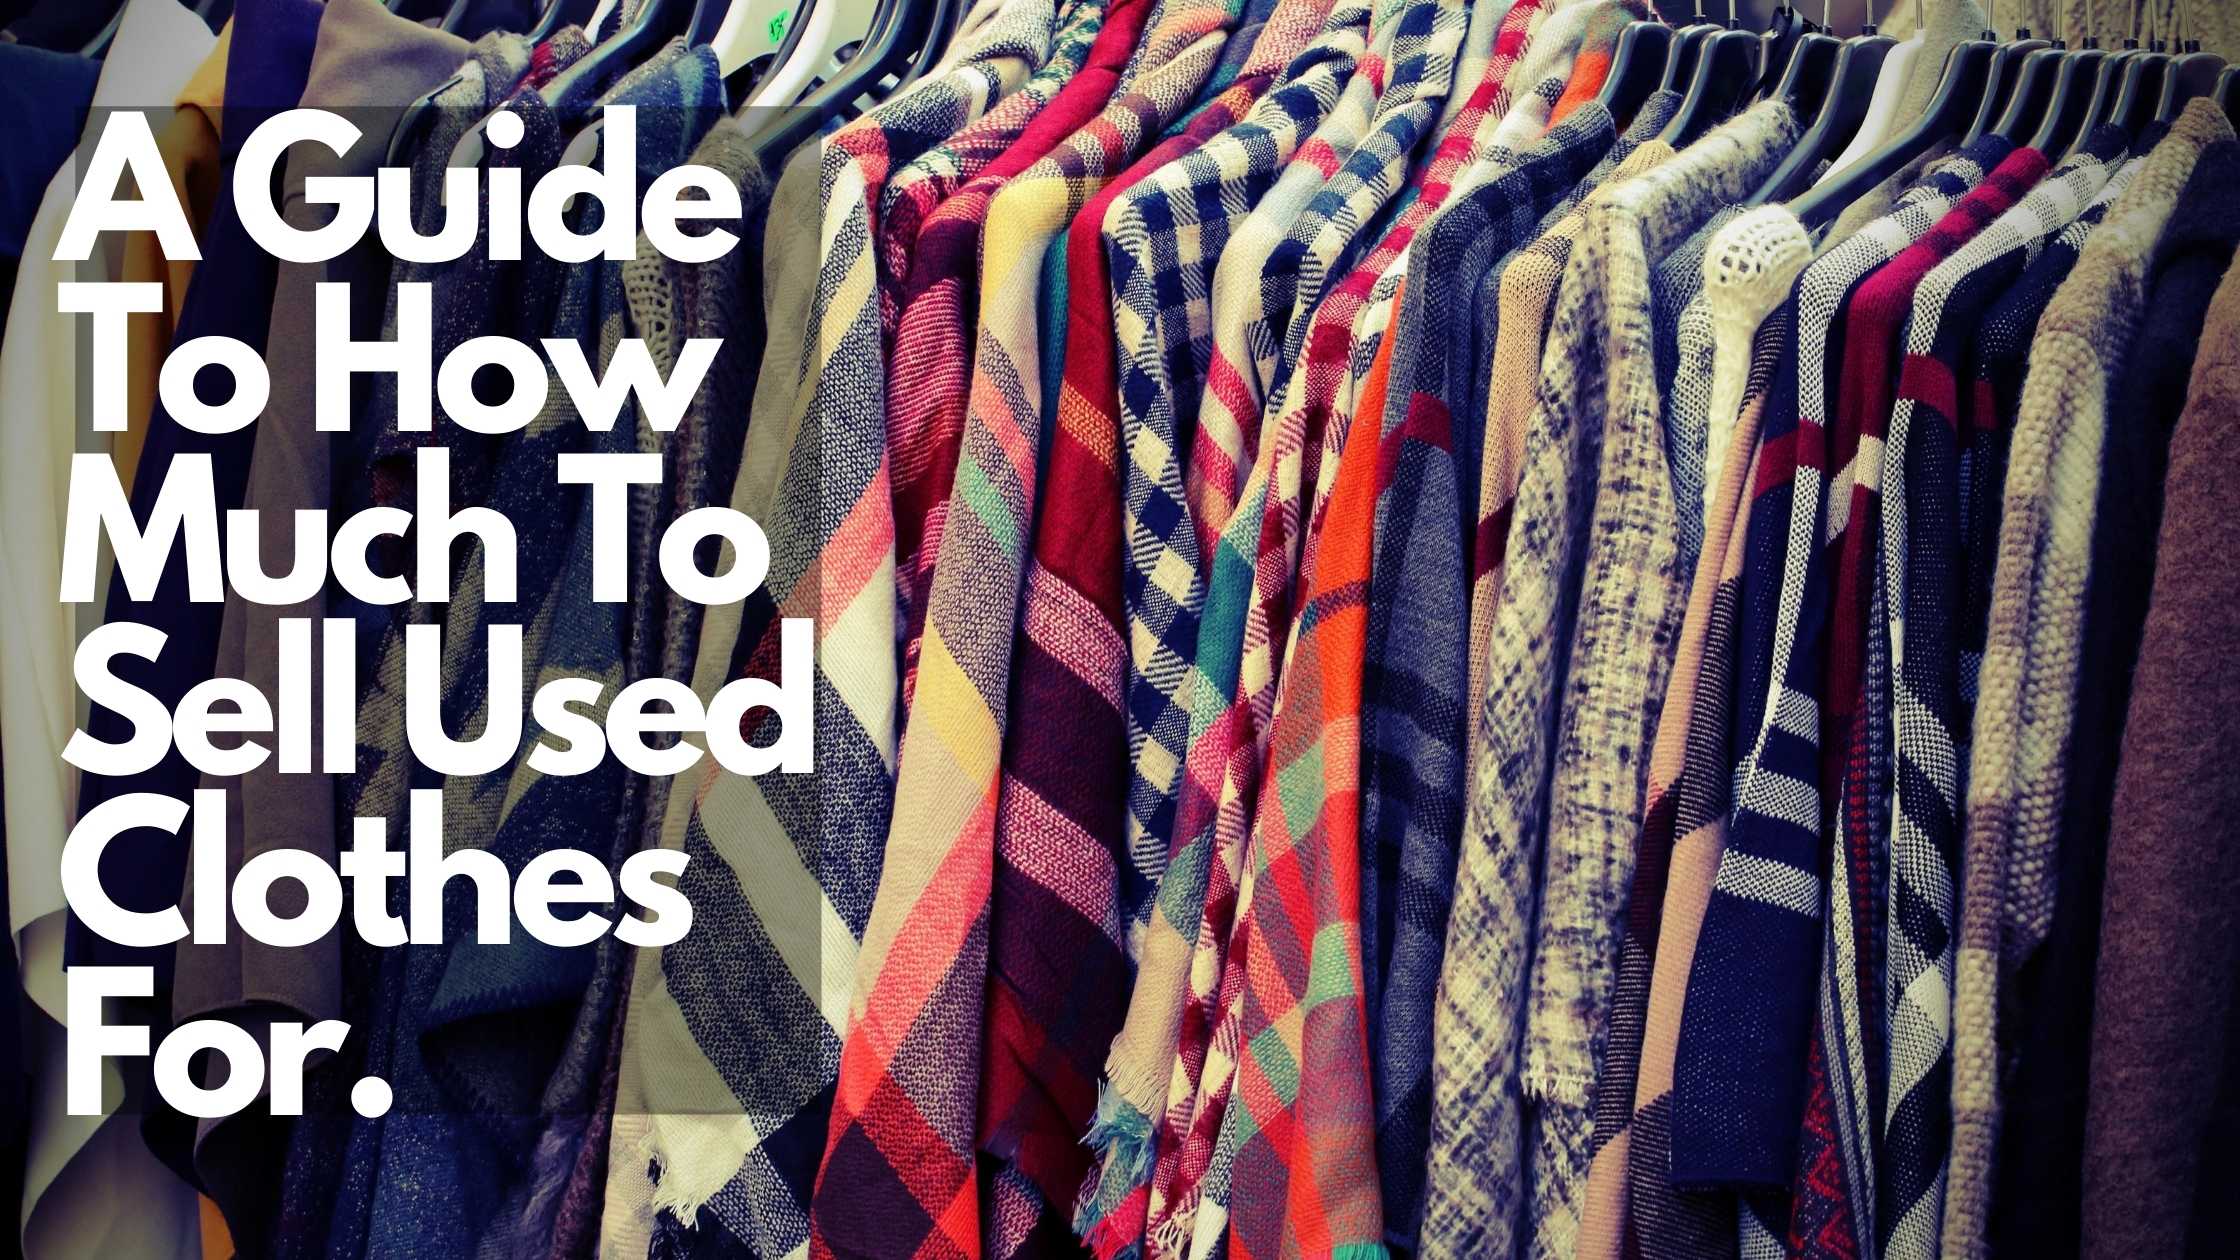 How to Sell Used Clothes